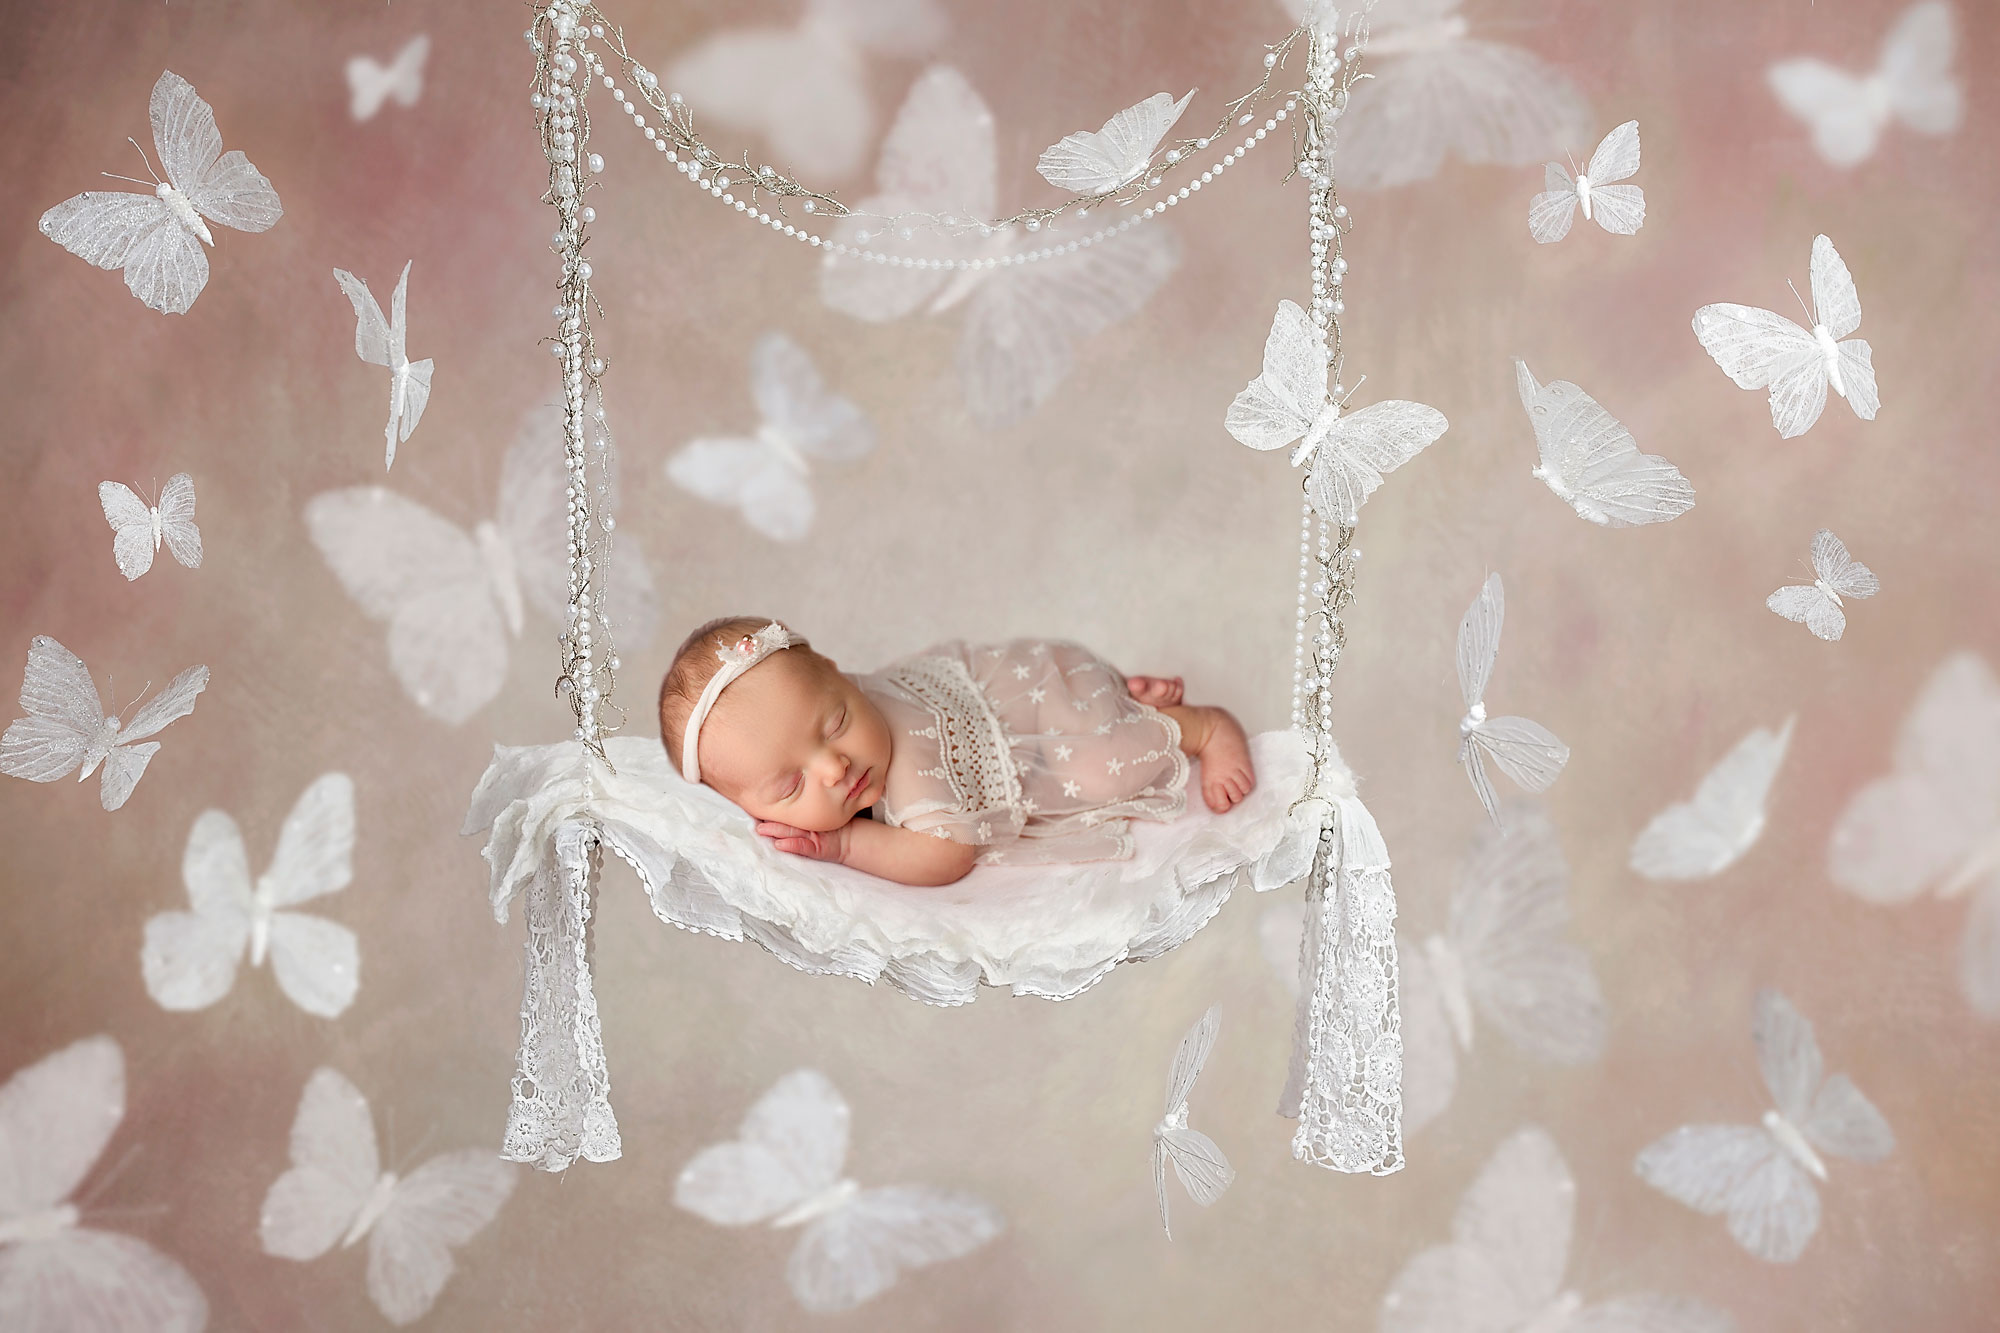 Creative photographs of newborn babies butterflies white and baby sleeping in a white swing surrounded by white butterflies 